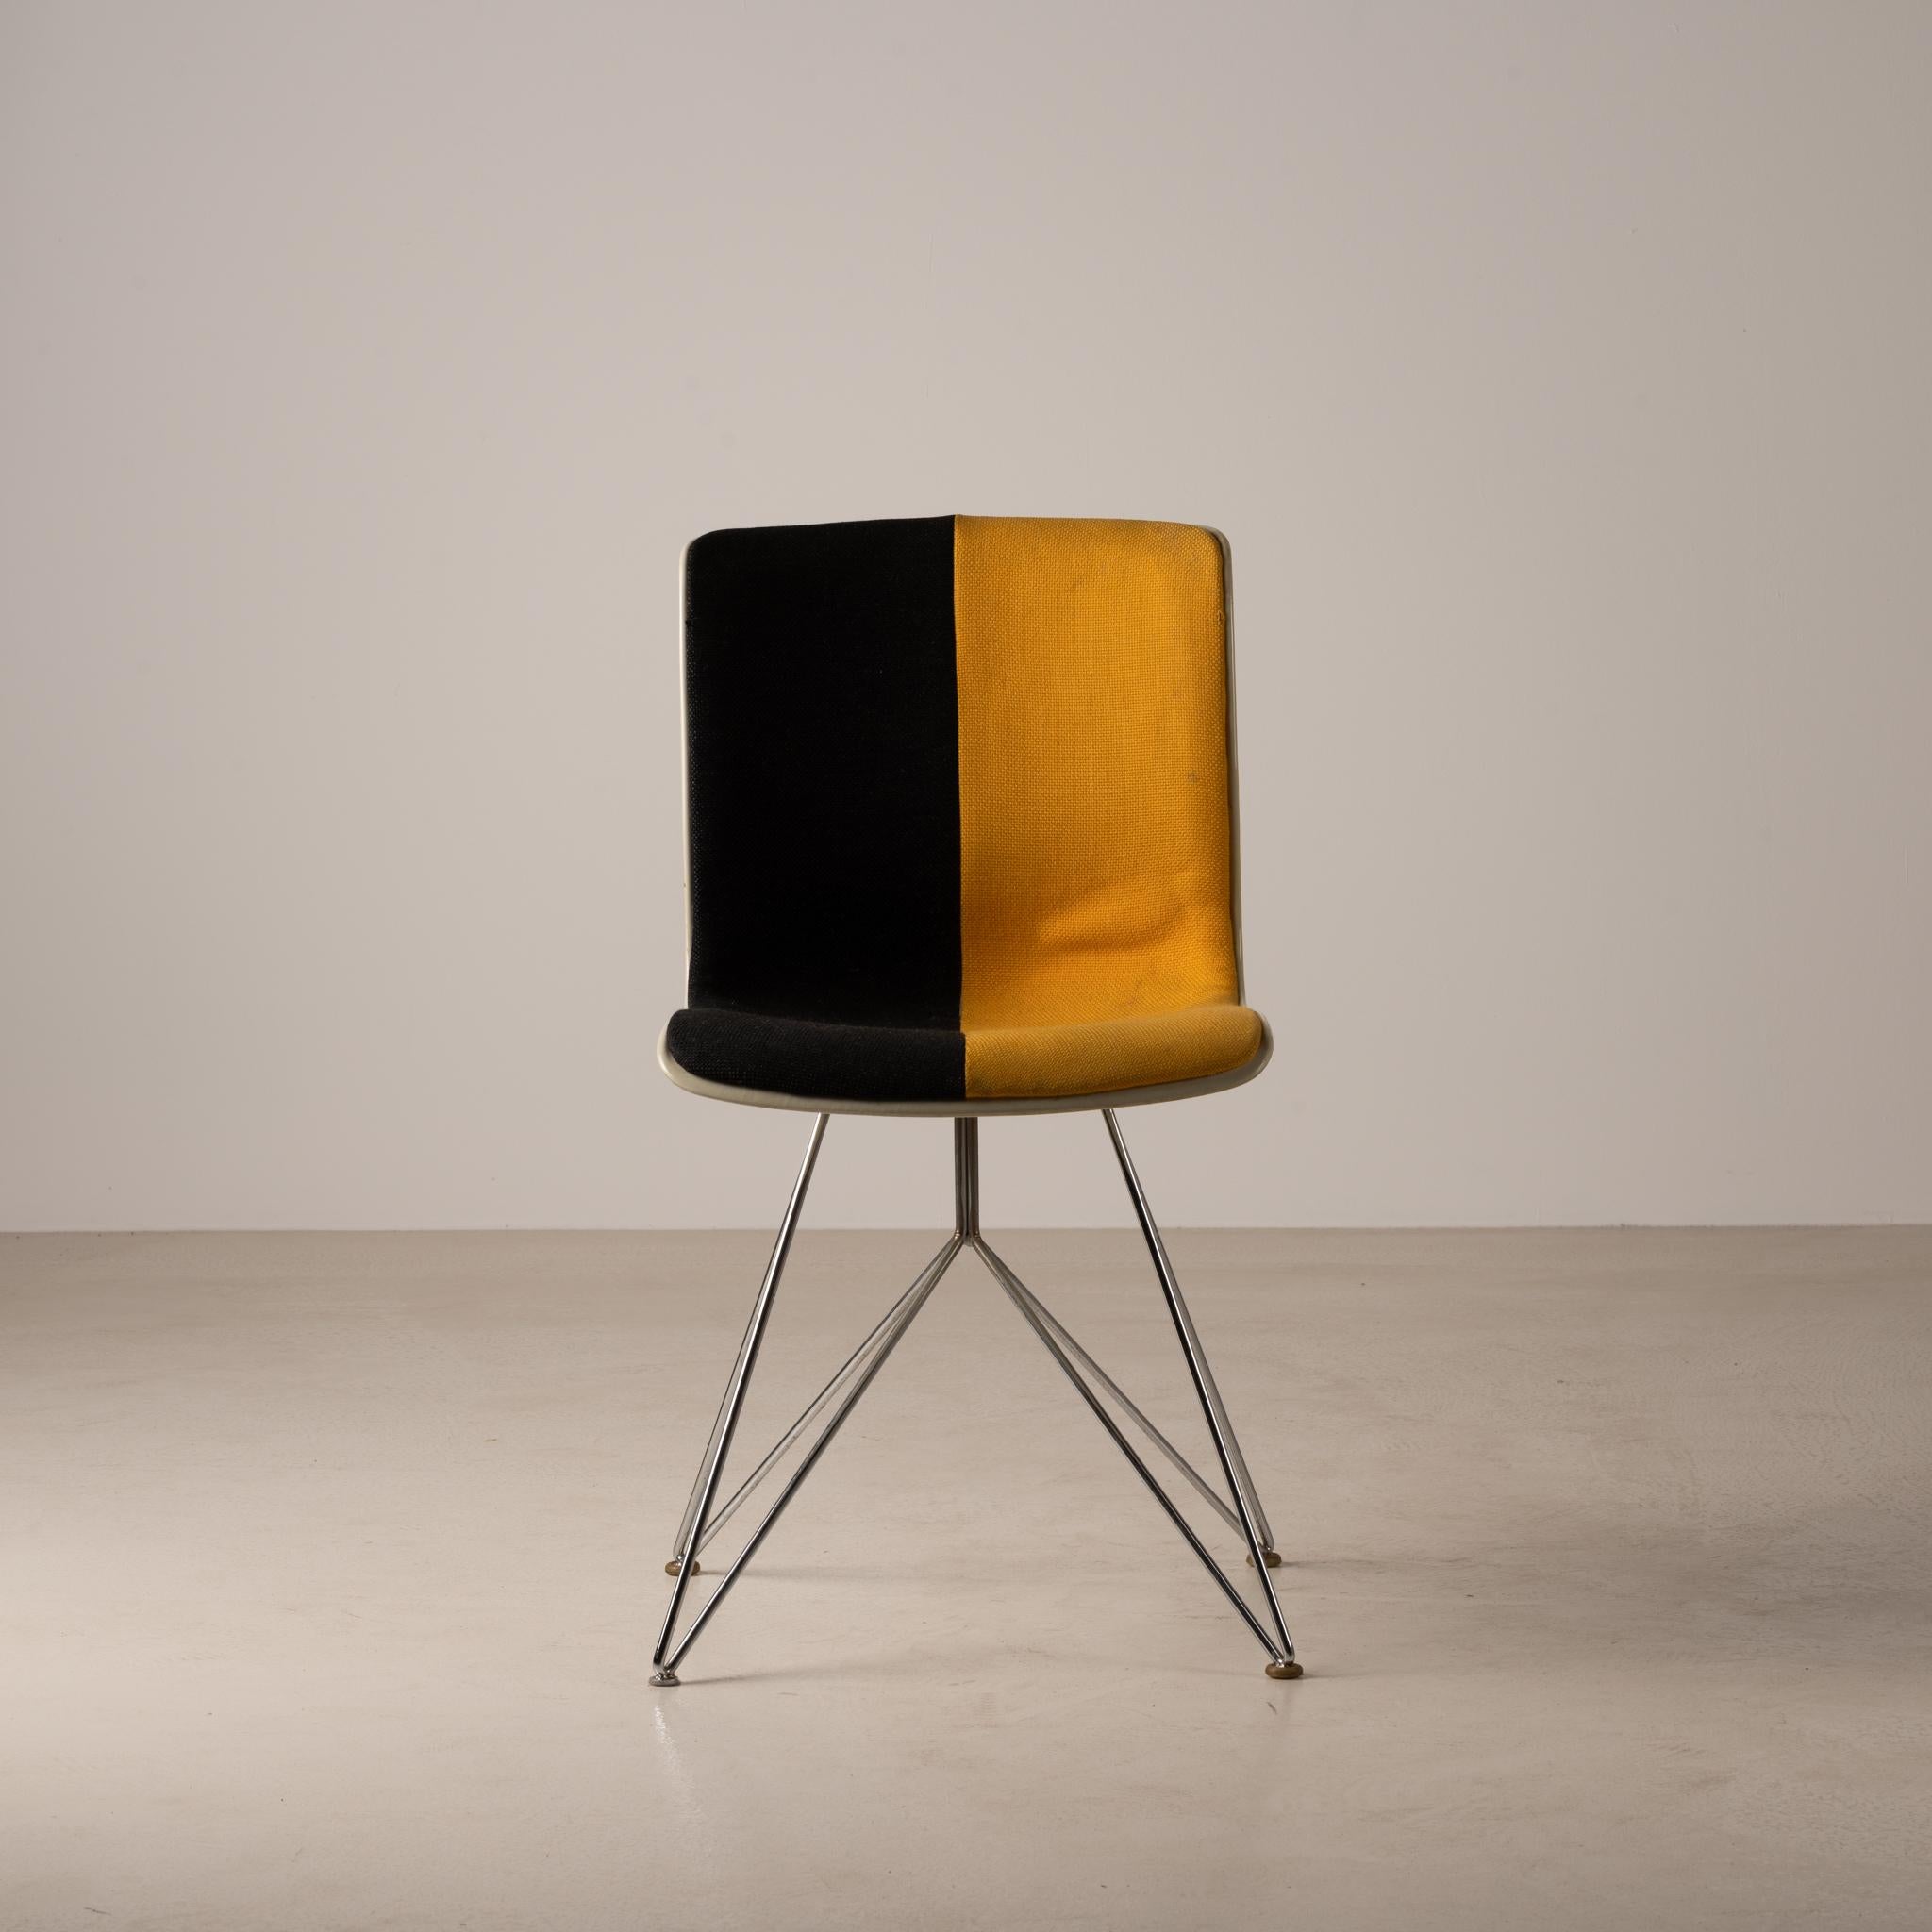 Designed in 1969 by Sori Yanagi, the Kobotuki chair has a comfortable FRP shell seat, steel plated legs and original black and yellow upholstery.

Back in the 1960s, this chair was used in public buildings such as libraries. In recent years, its